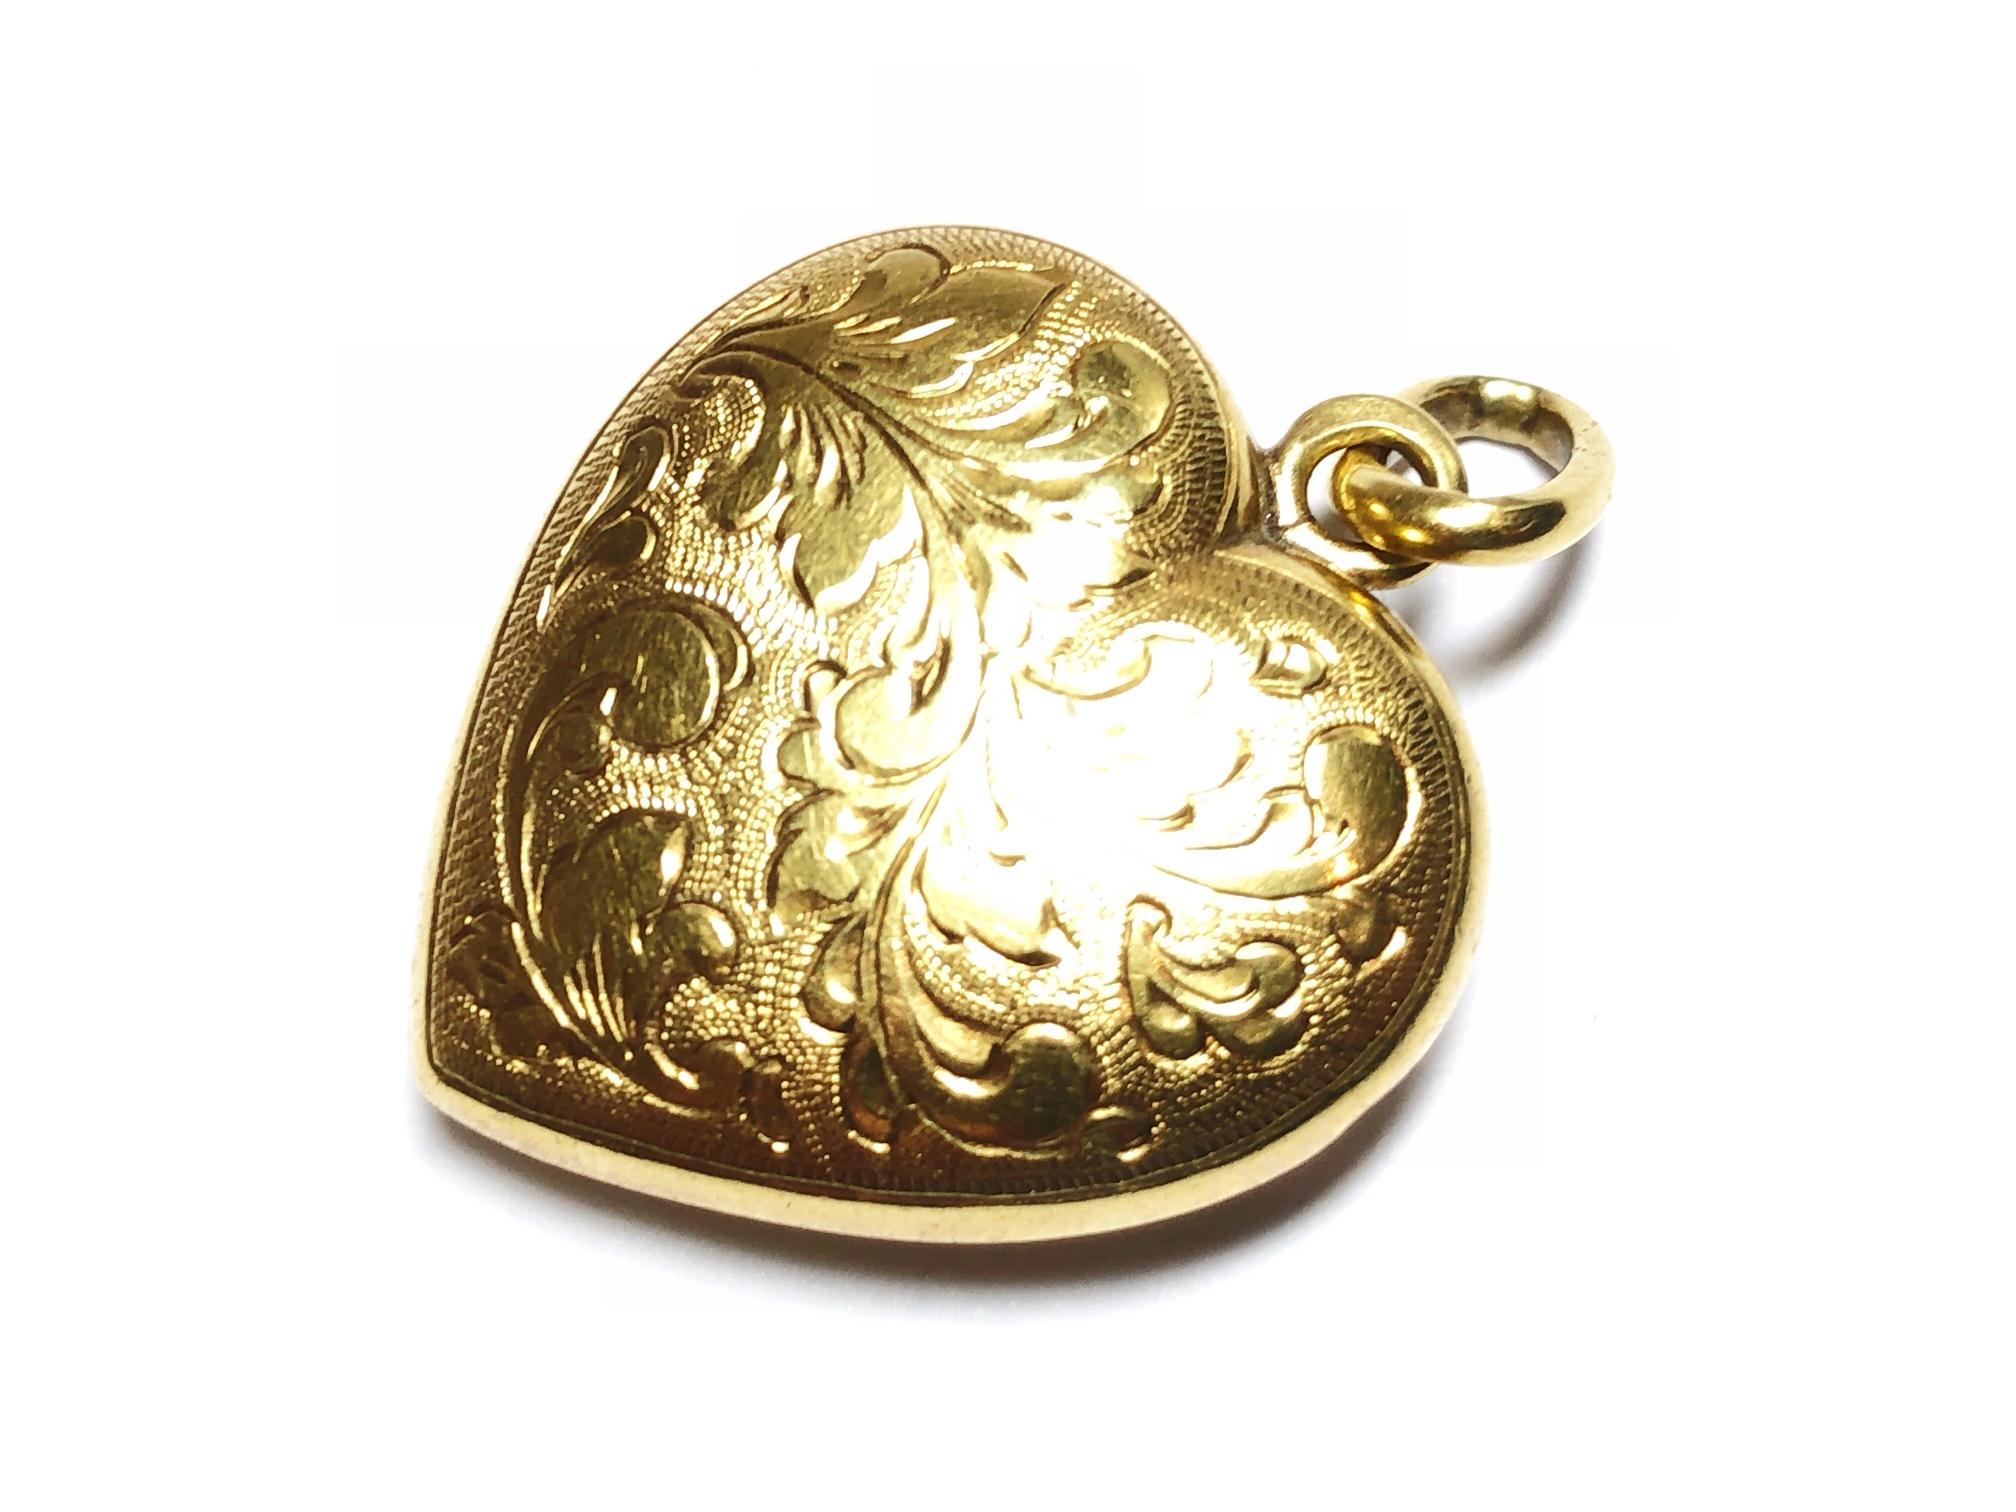 A heart pendant, with an engraved, foliage design, on the front, mounted in hollow, 14ct gold, made in Austria between 1922 and 1925.